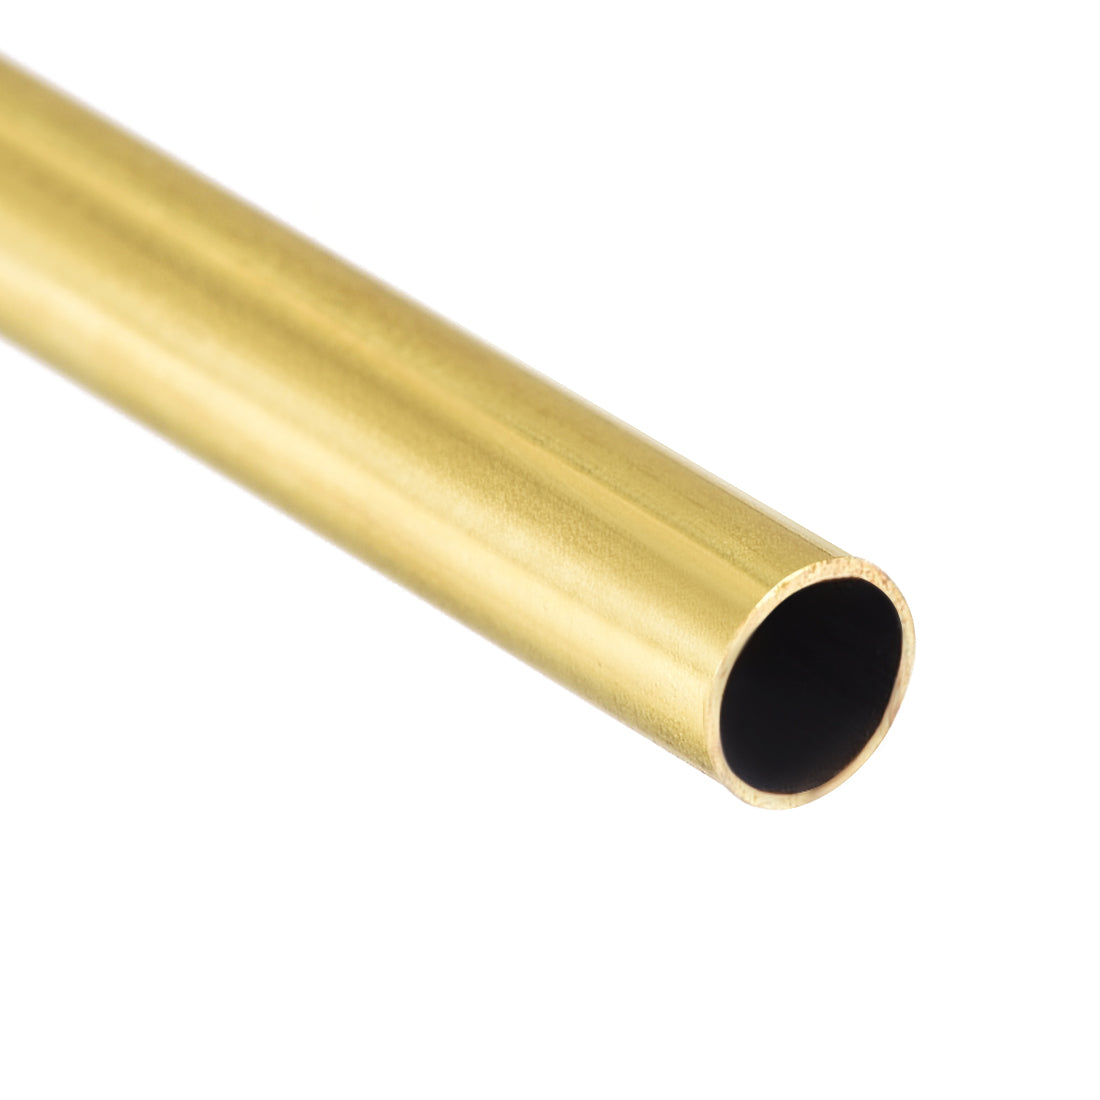 Uxcell Uxcell Brass Round Tube 300mm Length 7mm OD 0.5mm Wall Thickness Seamless Straight Pipe Tubing 3 Pcs